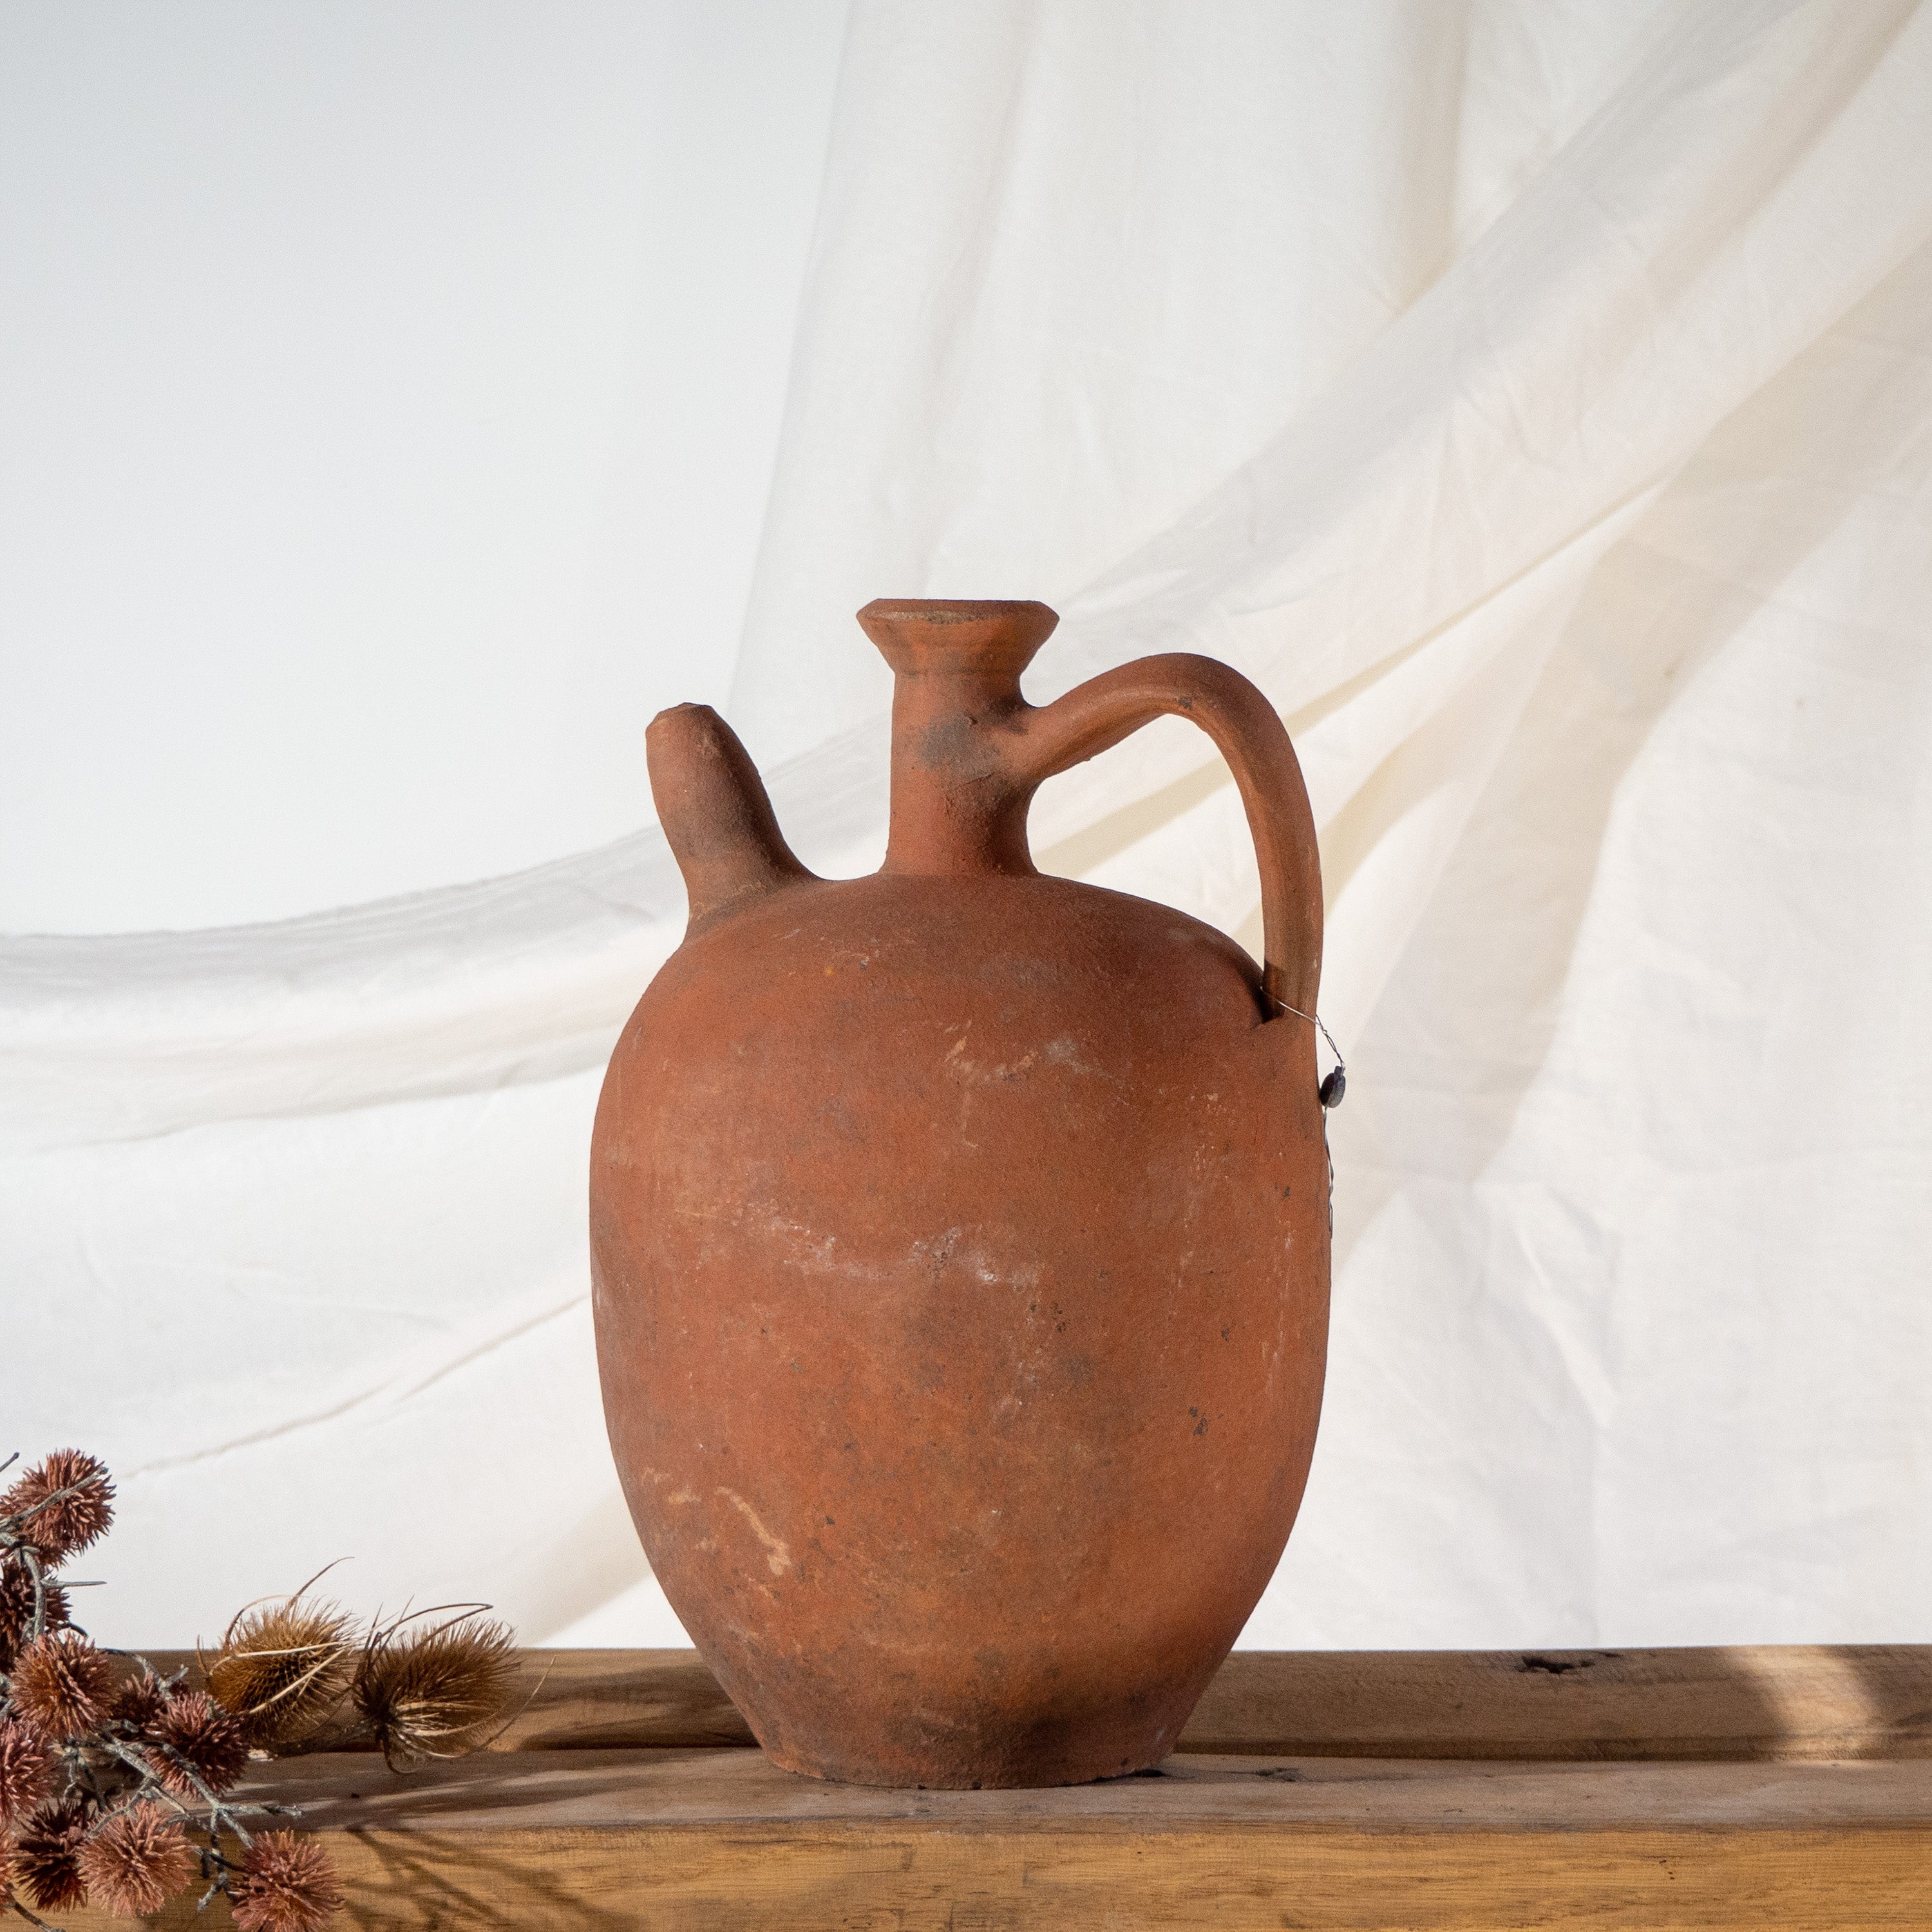 Vintage Turkish terracotta jar with spout and single handle on vintage timber bench seat with dried flowers